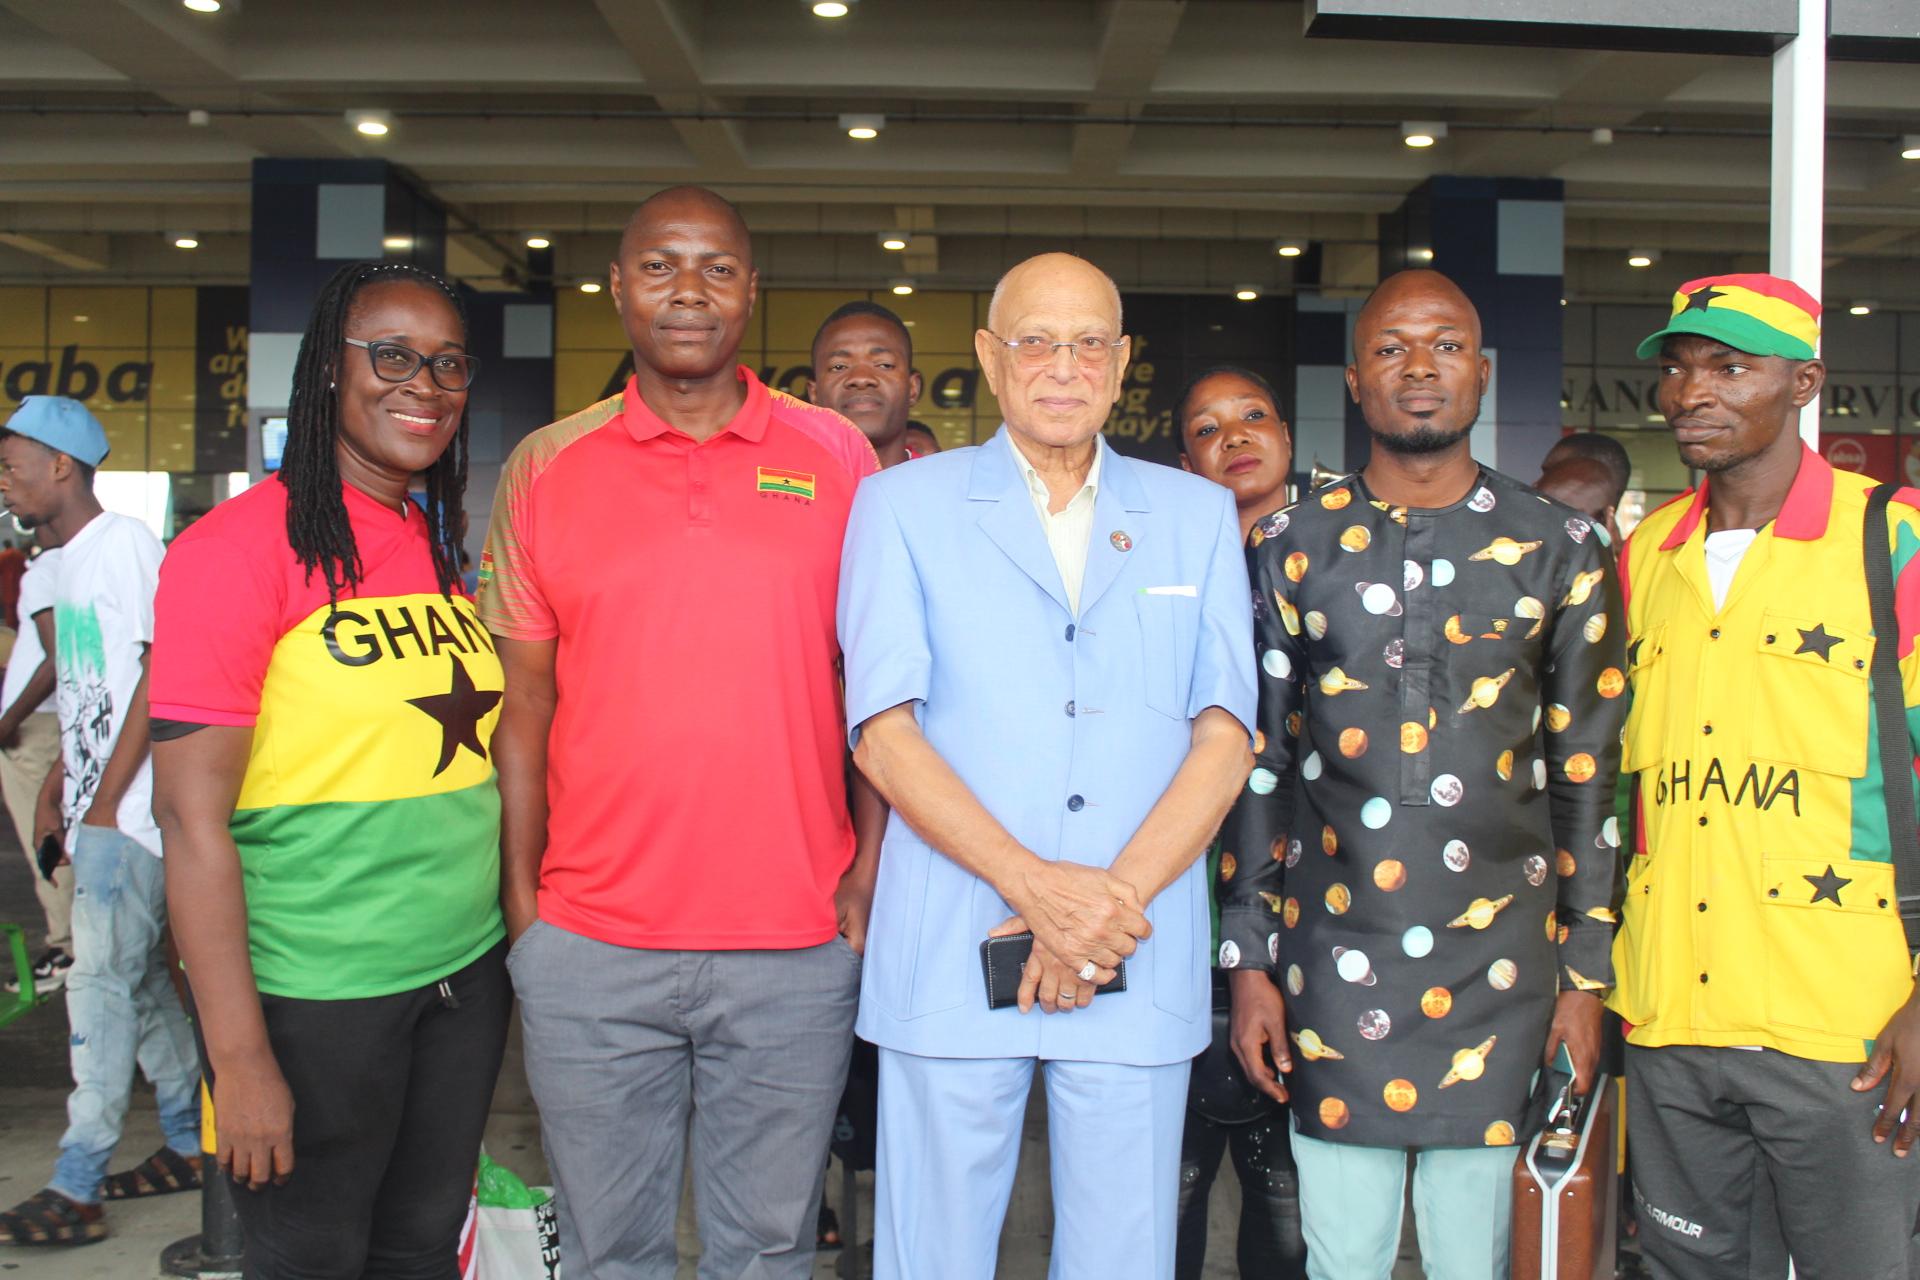 African Bowling President wants to popularise the sport in Ghana